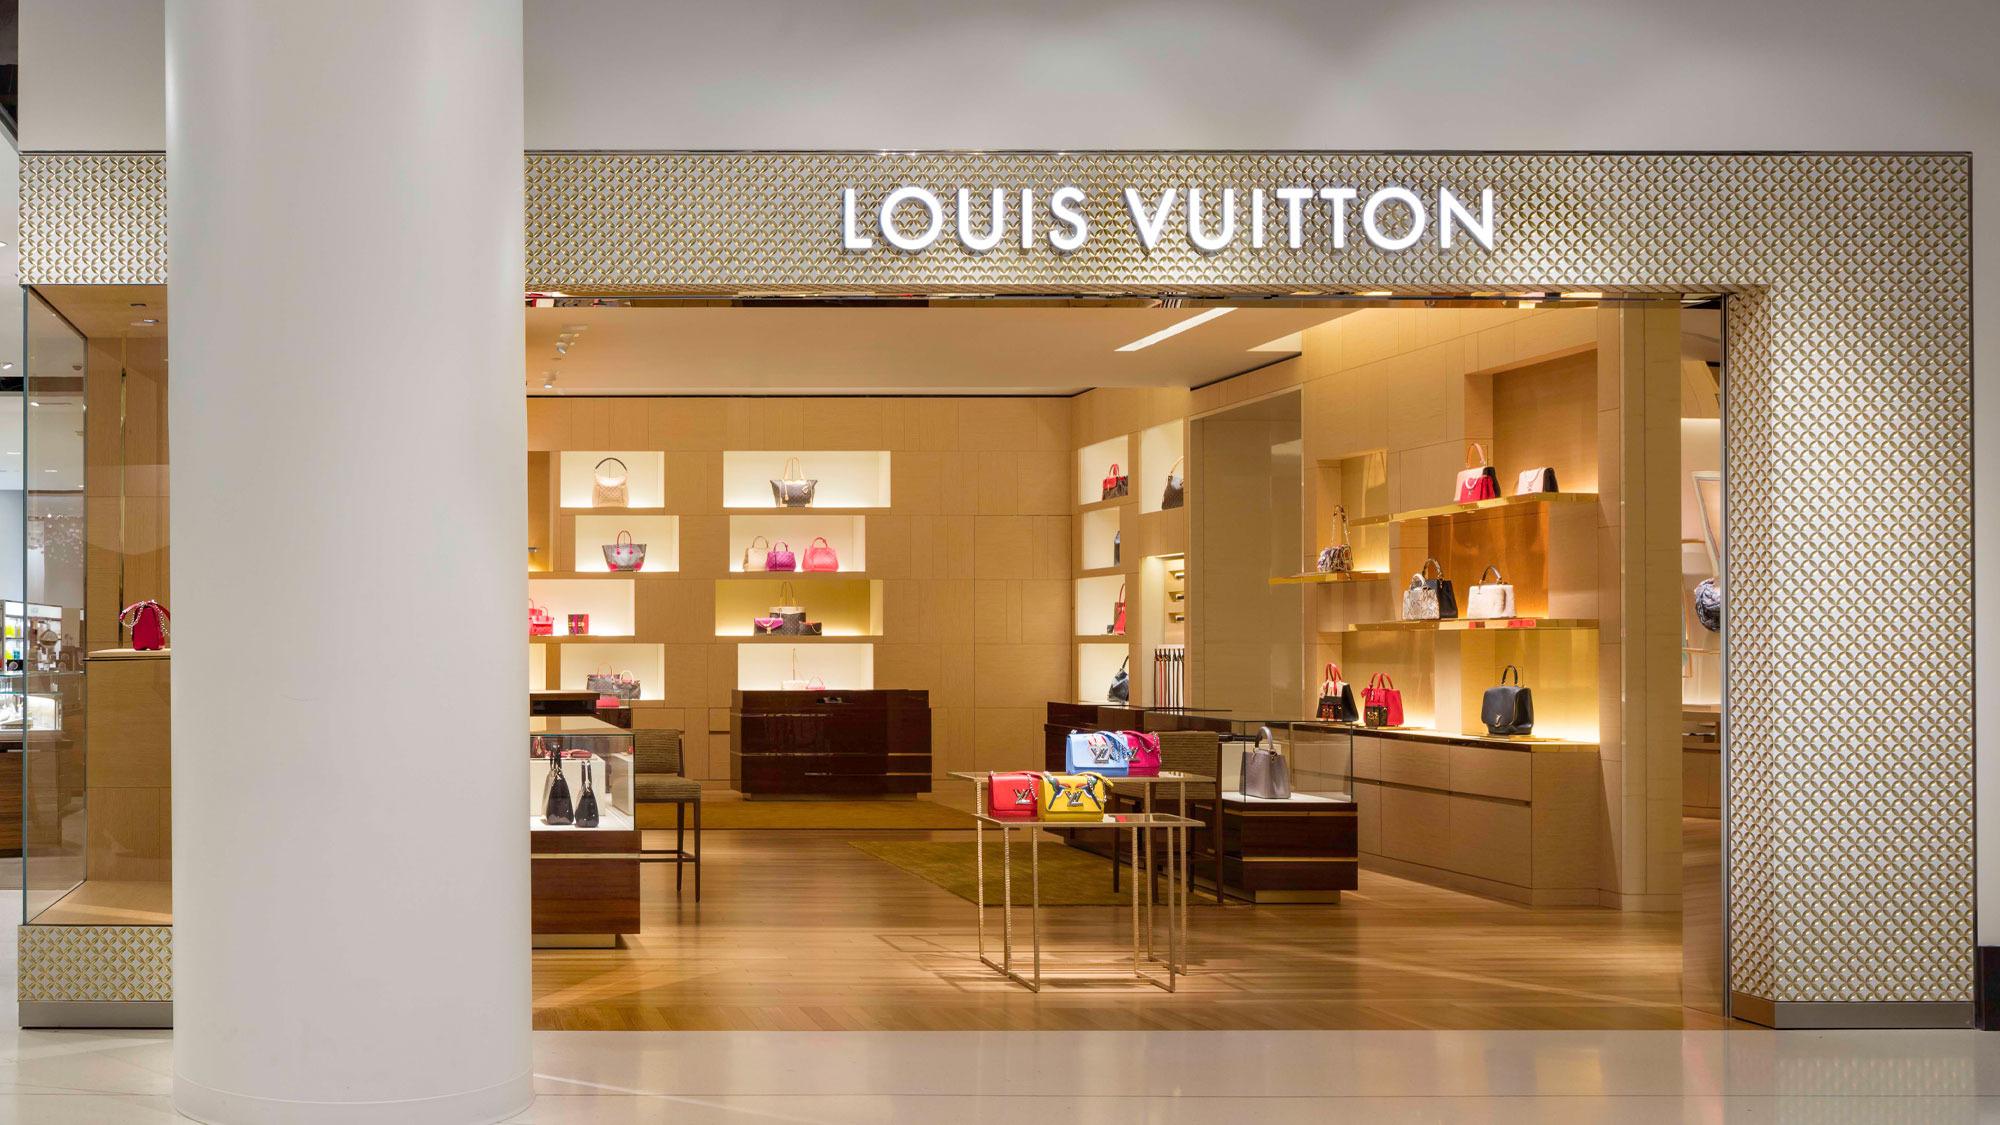 Louis Vuitton Seattle Nordstrom Coupons near me in Seattle, WA 98101 | 8coupons